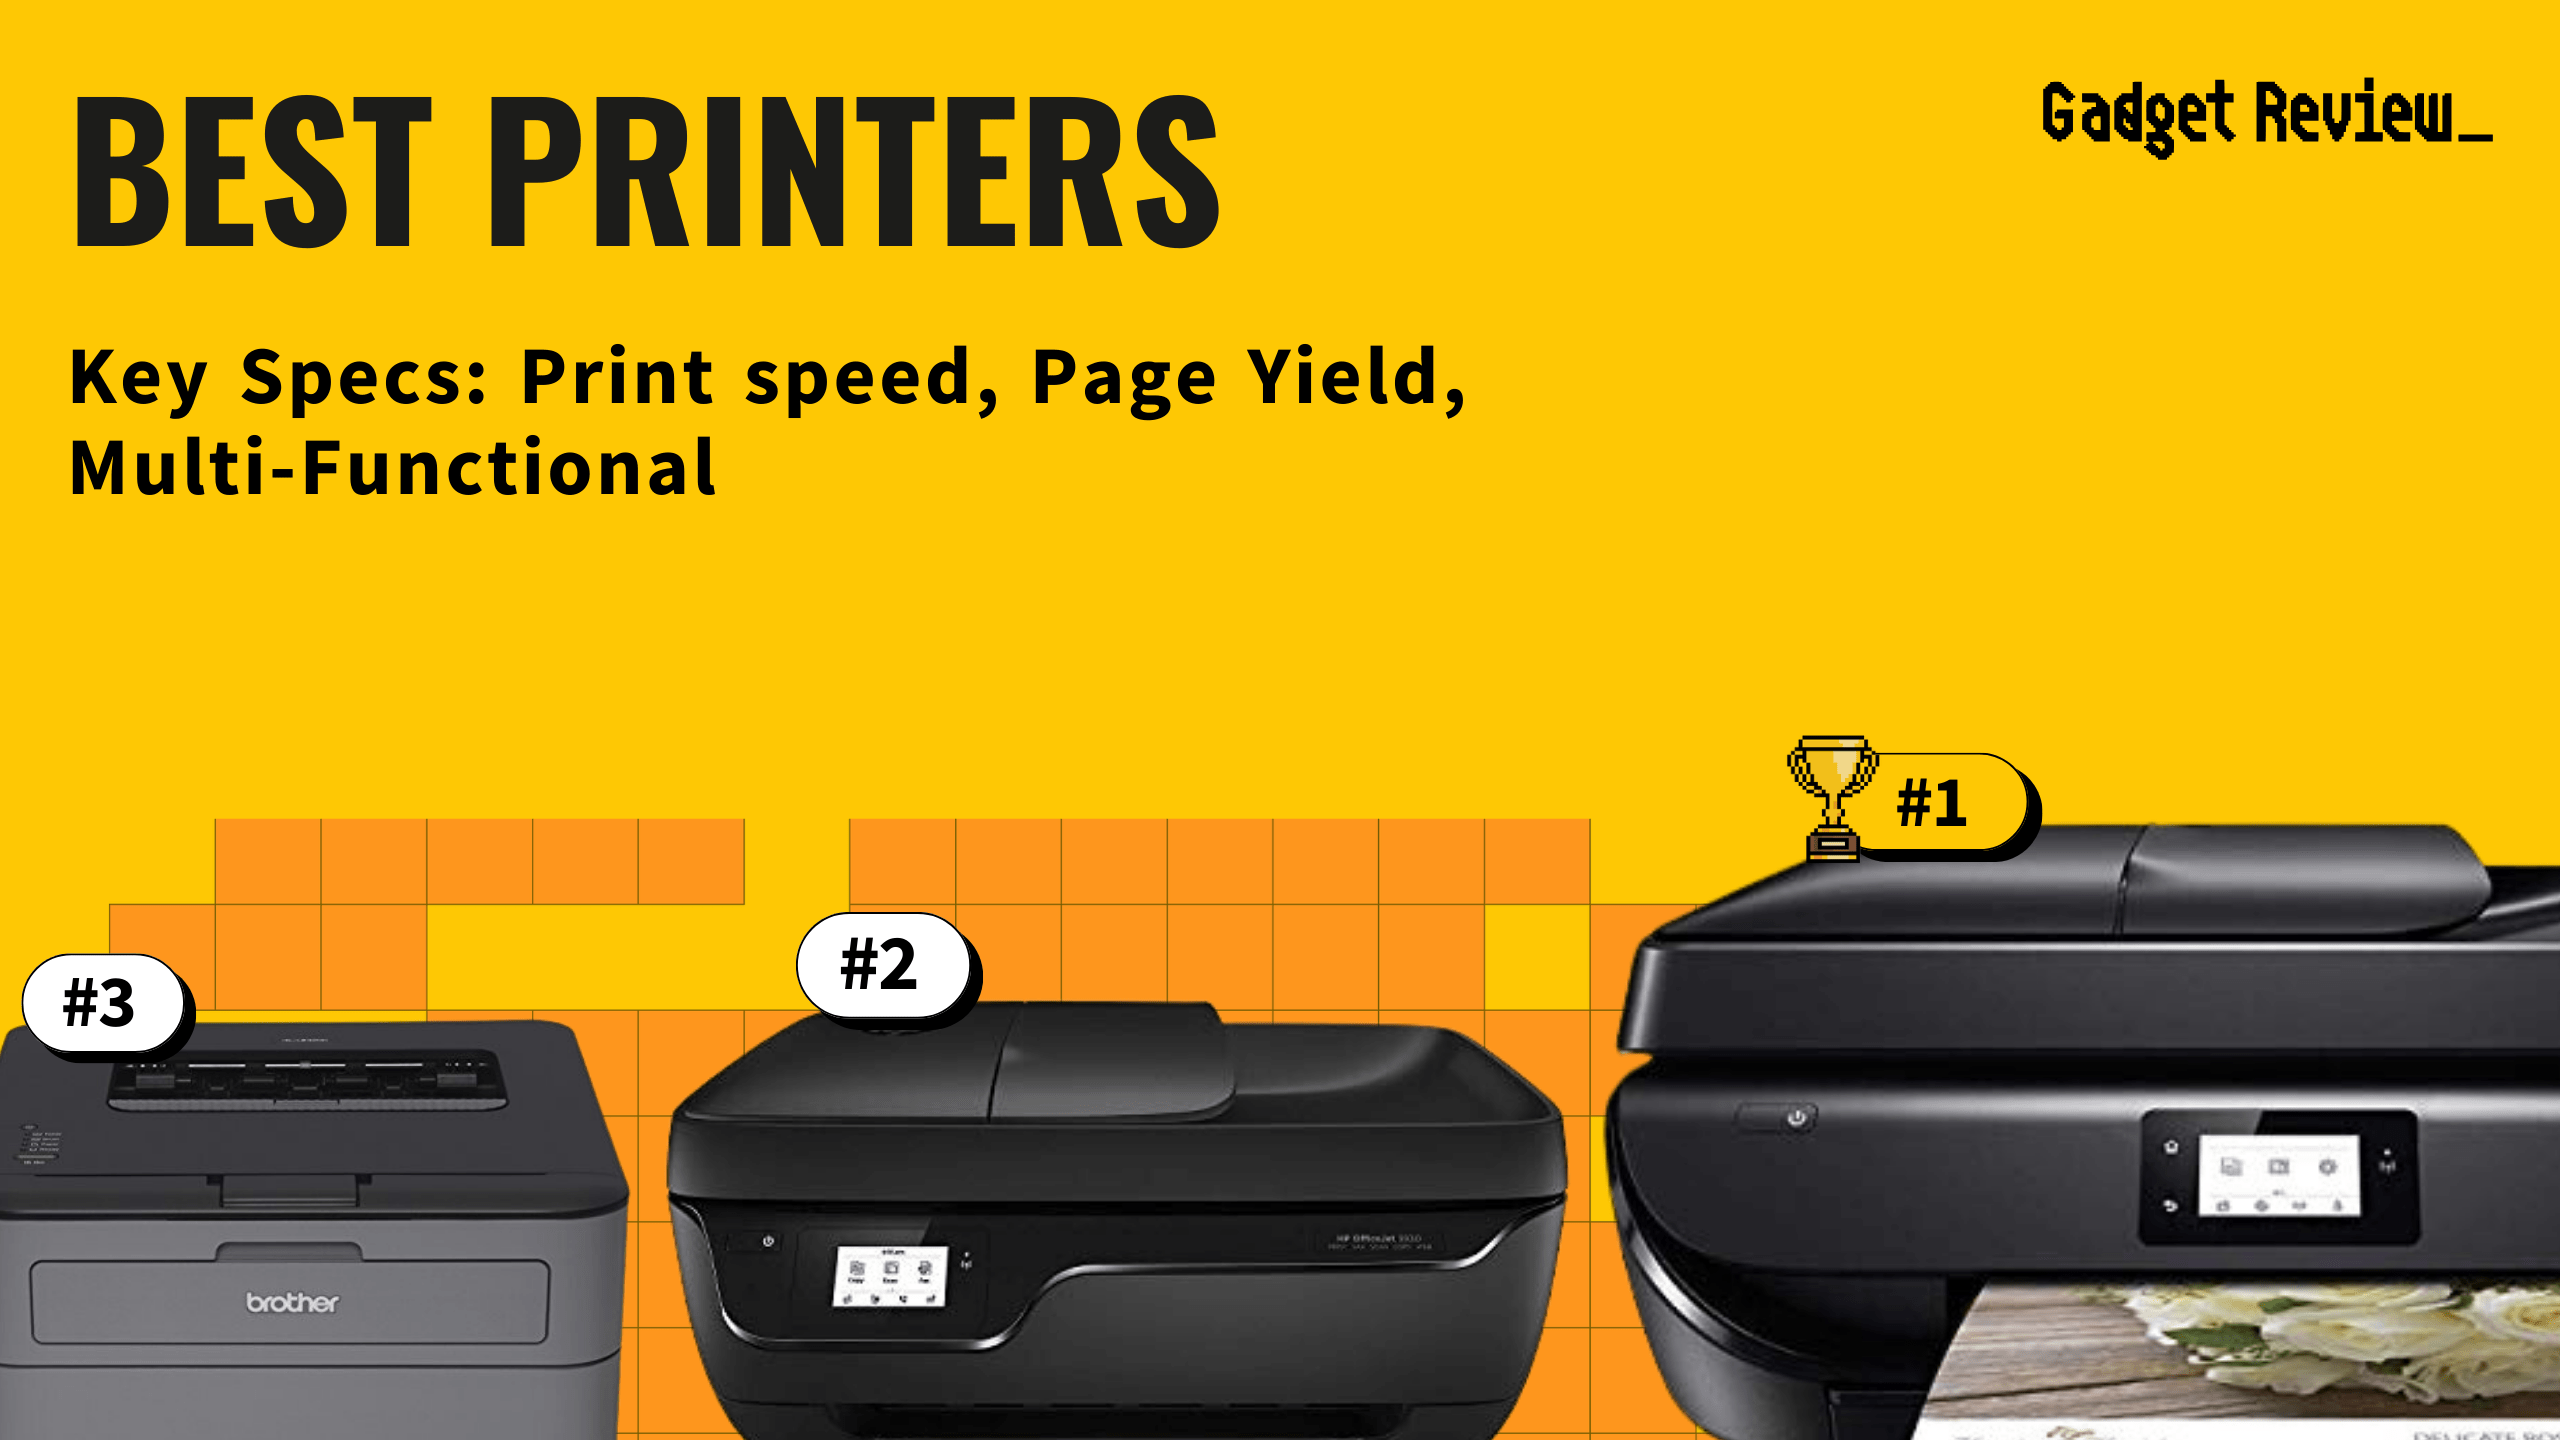 best printers featured image that shows the top three best printer models